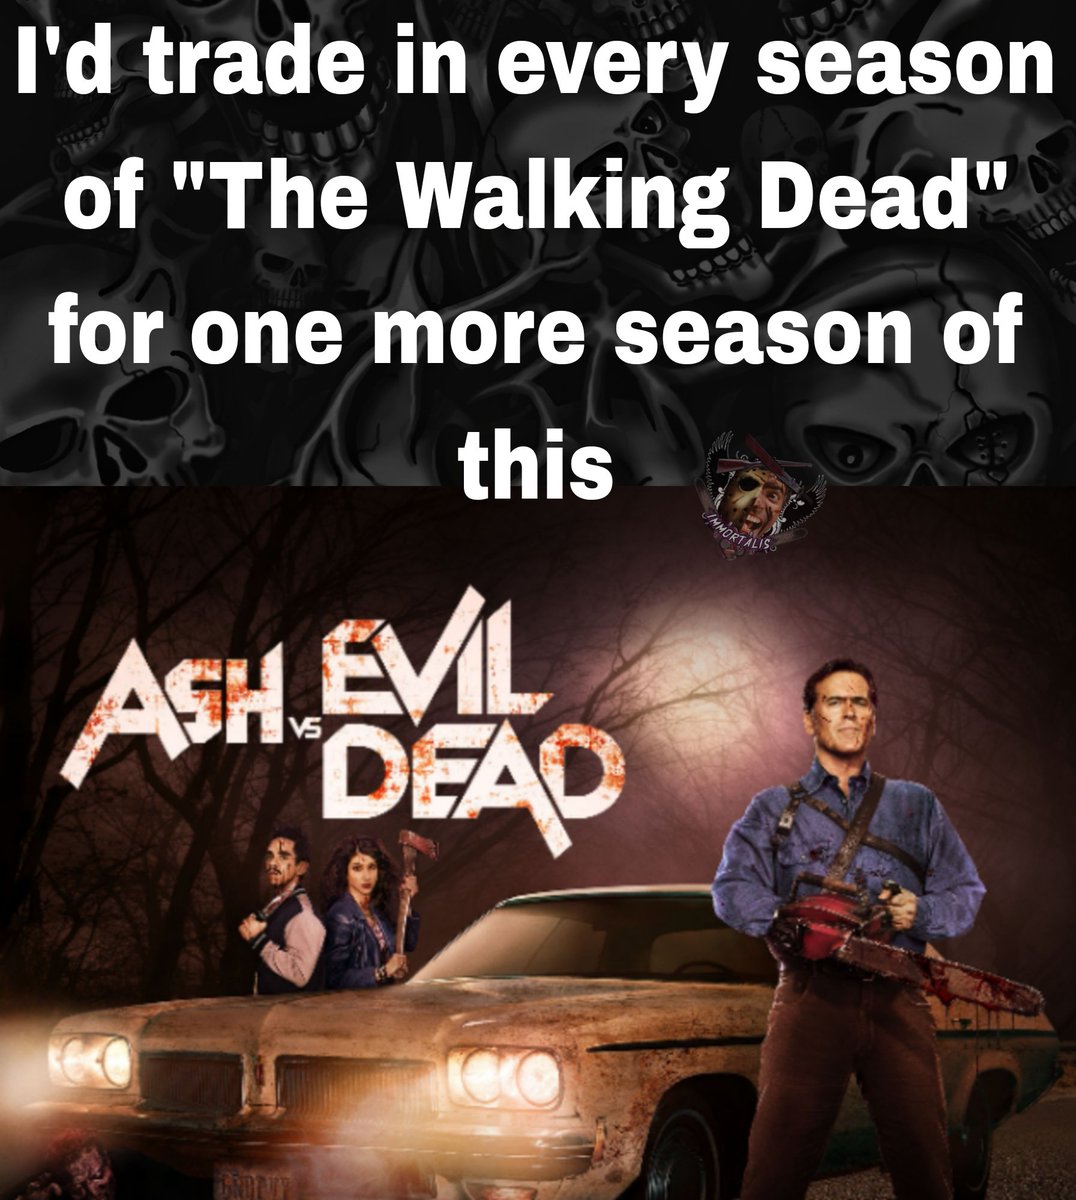 Who's with me?

#EvilDead #AshvsEvilDead